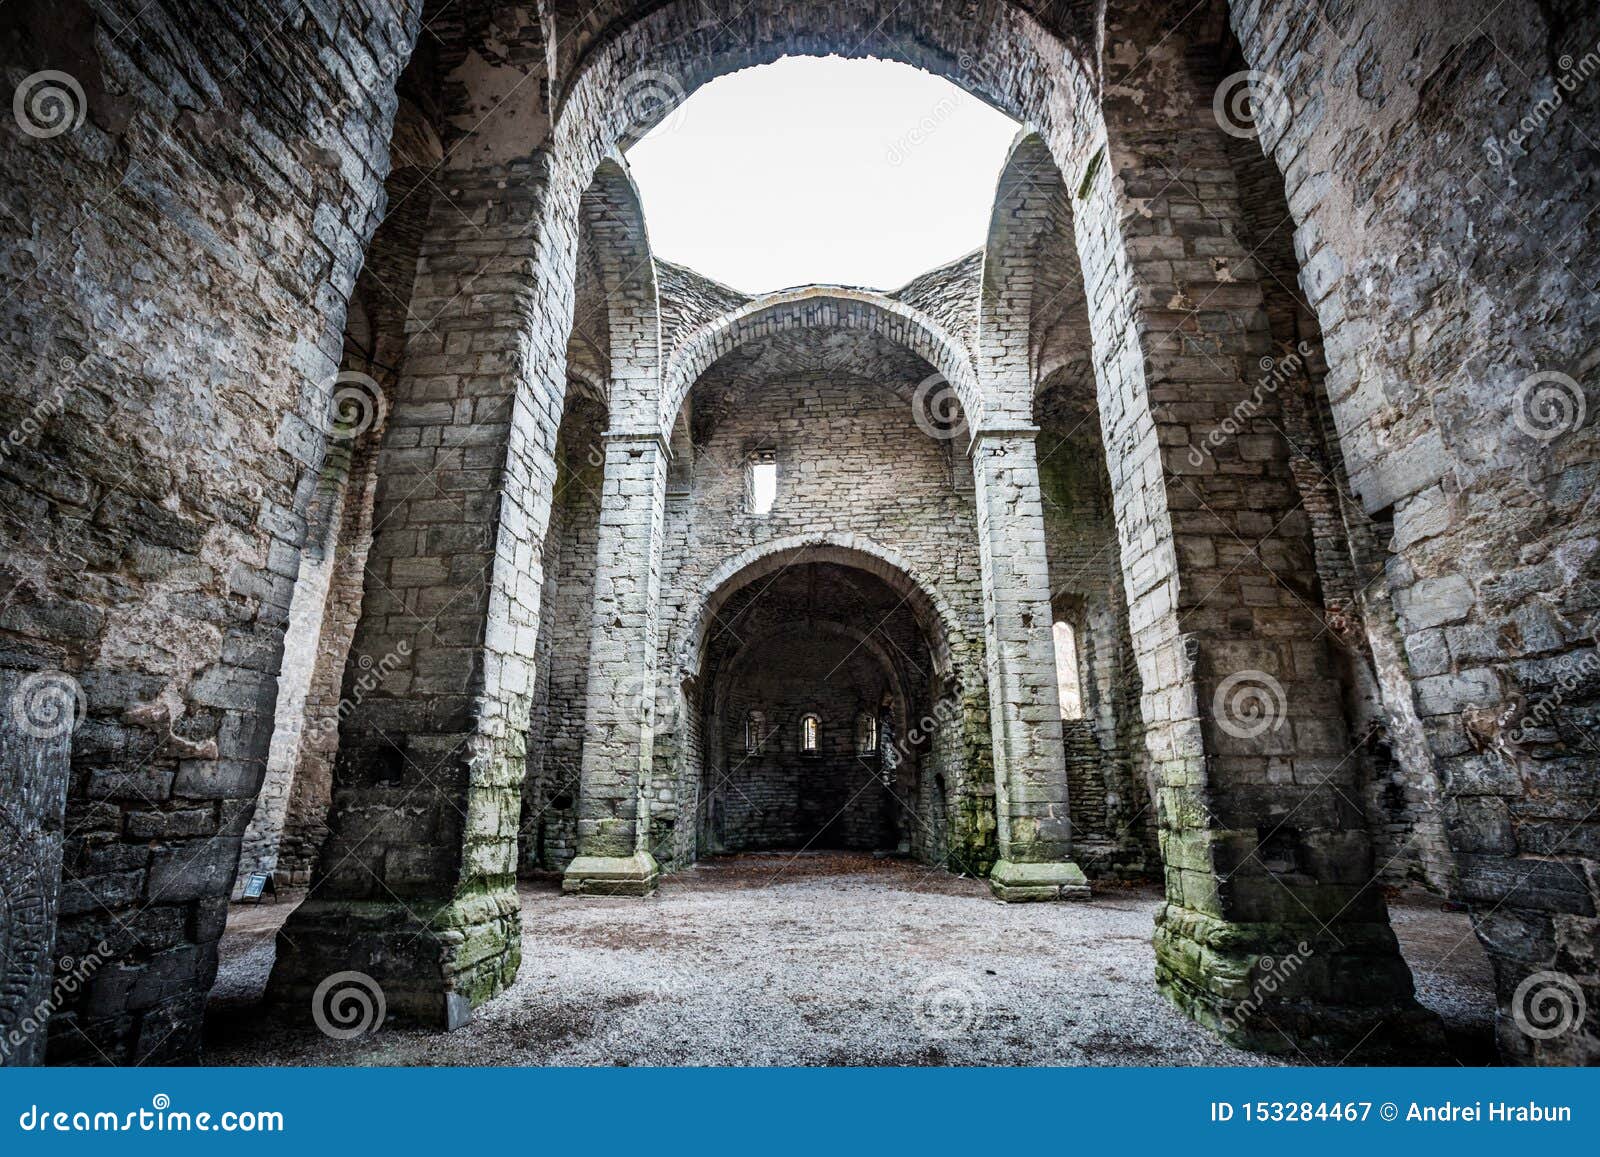 Old Scandinavian Abandoned Ancient Castle With High Stone Material Walls Stock Image Image Of Entrance Cellar